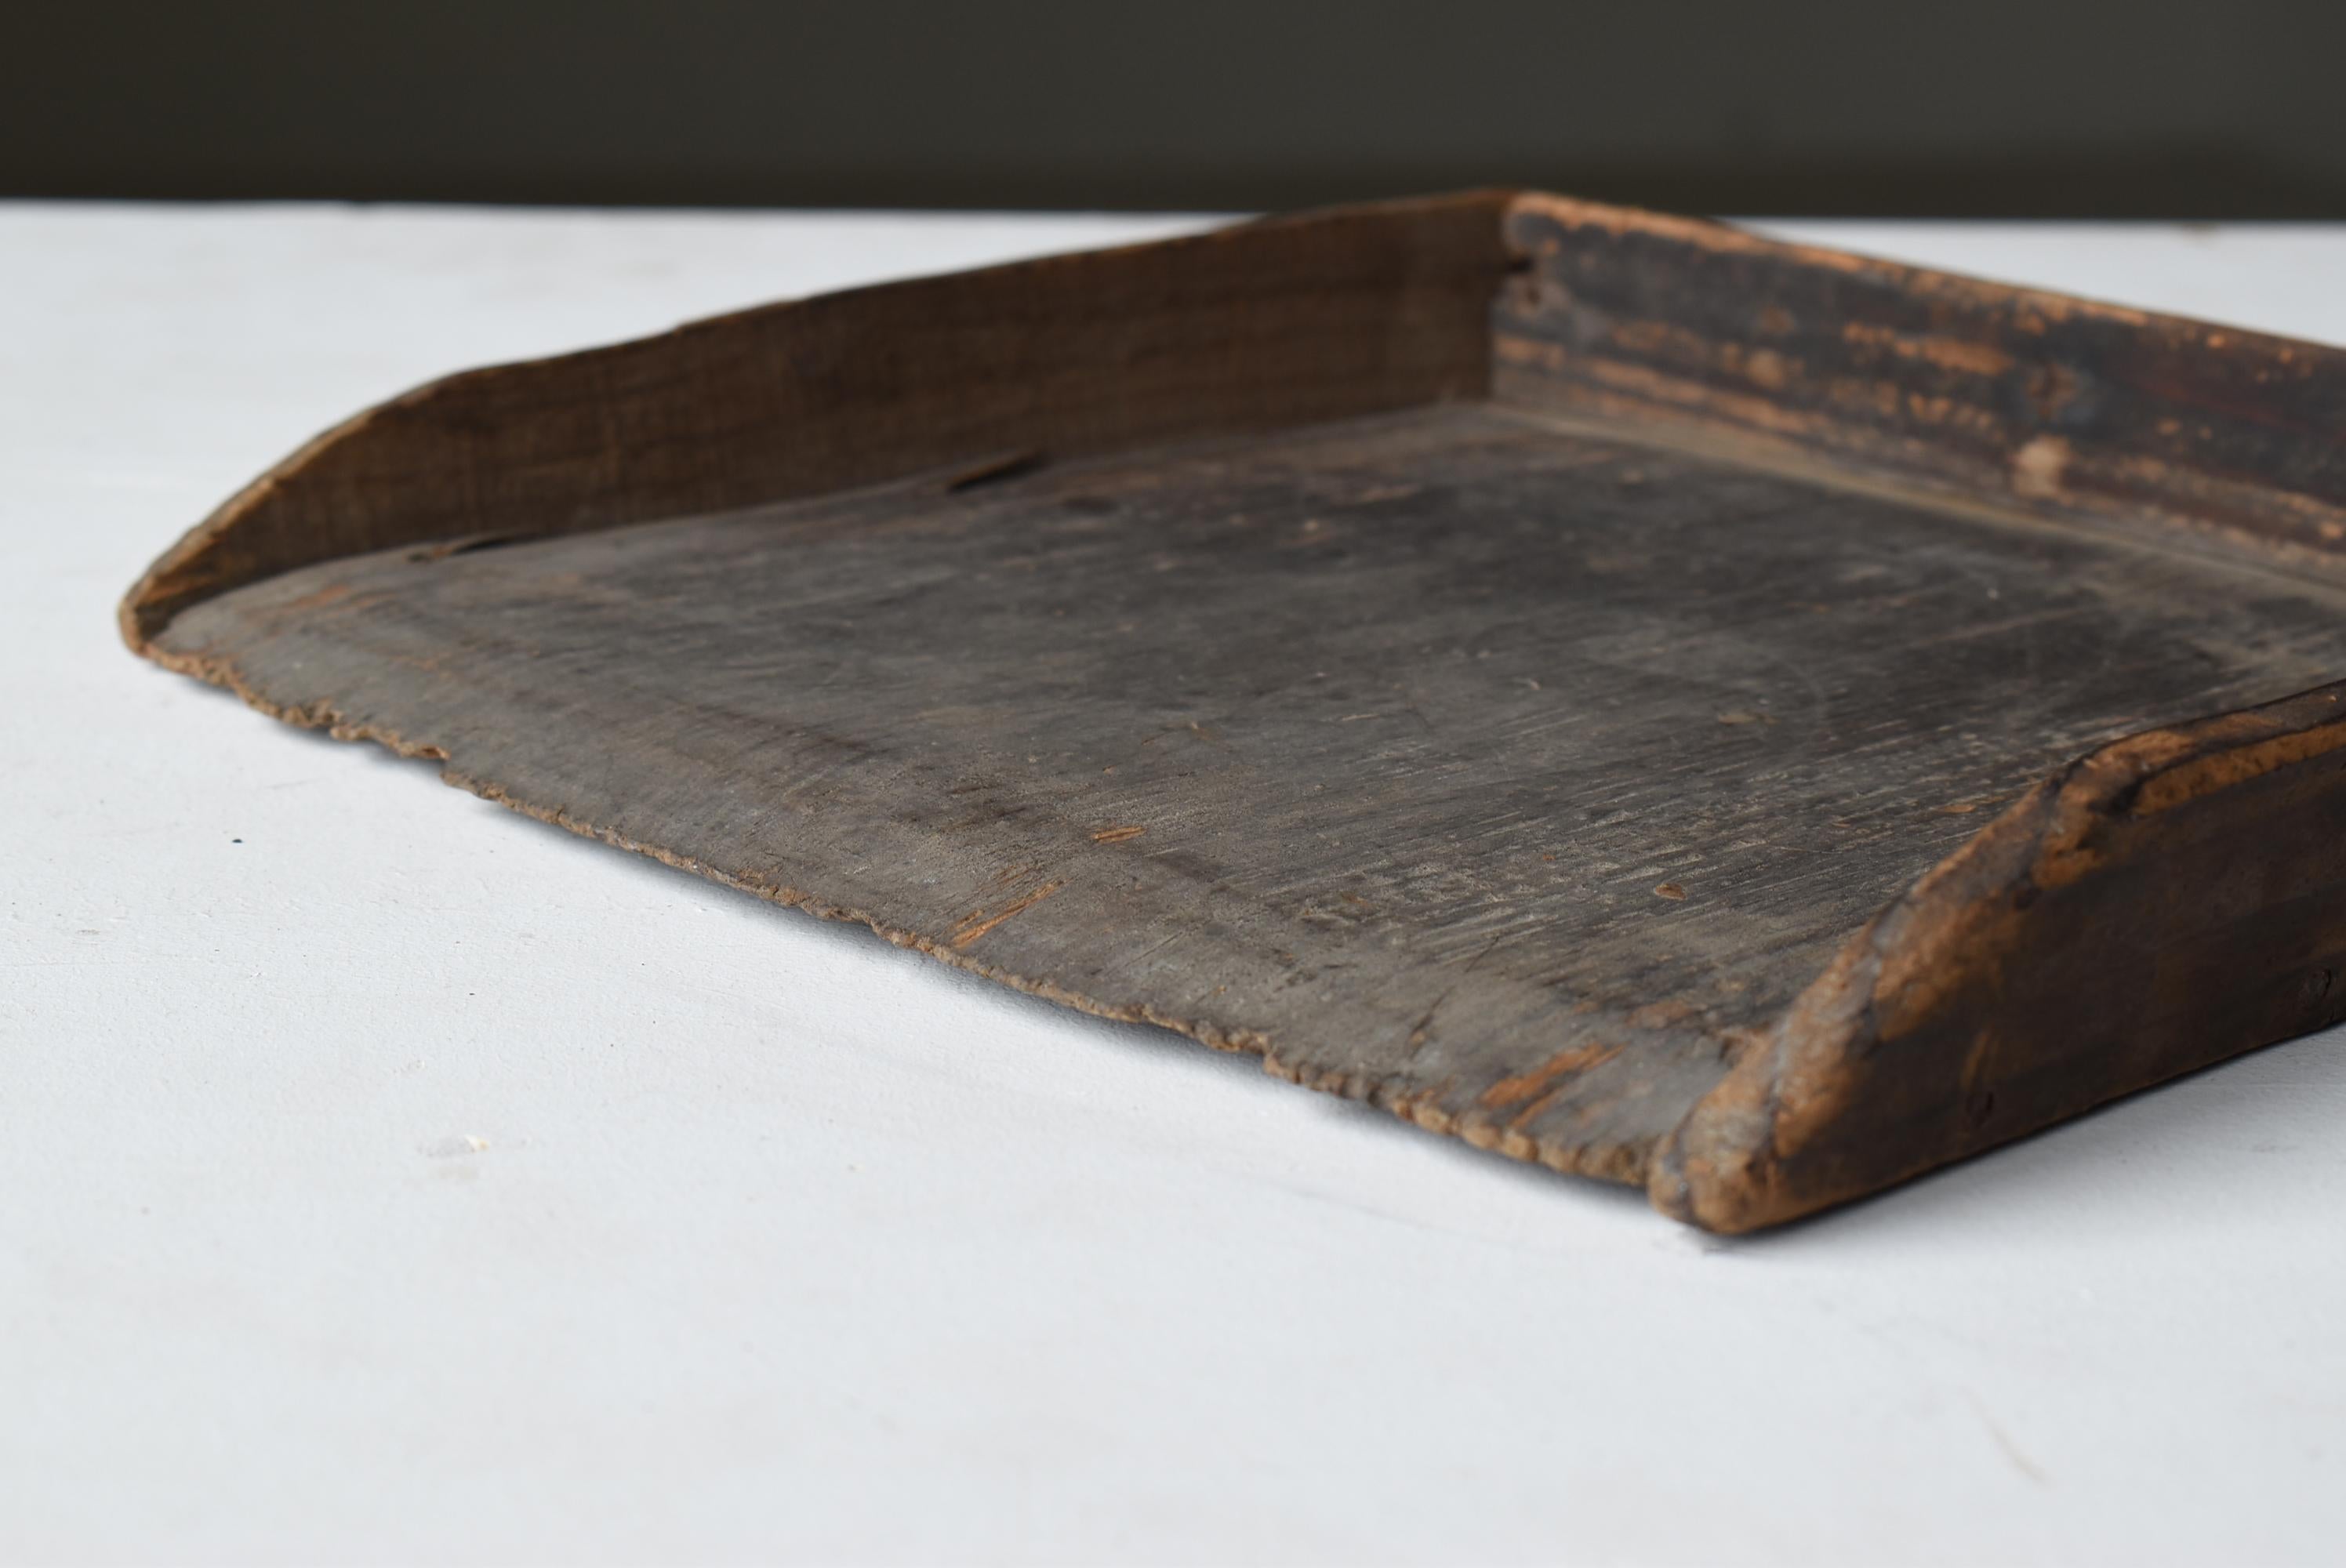 Japanese Antique Wabi Sabi Art Dustpan 1910s-1920s / Object Contemporary Art In Good Condition For Sale In Sammu-shi, Chiba